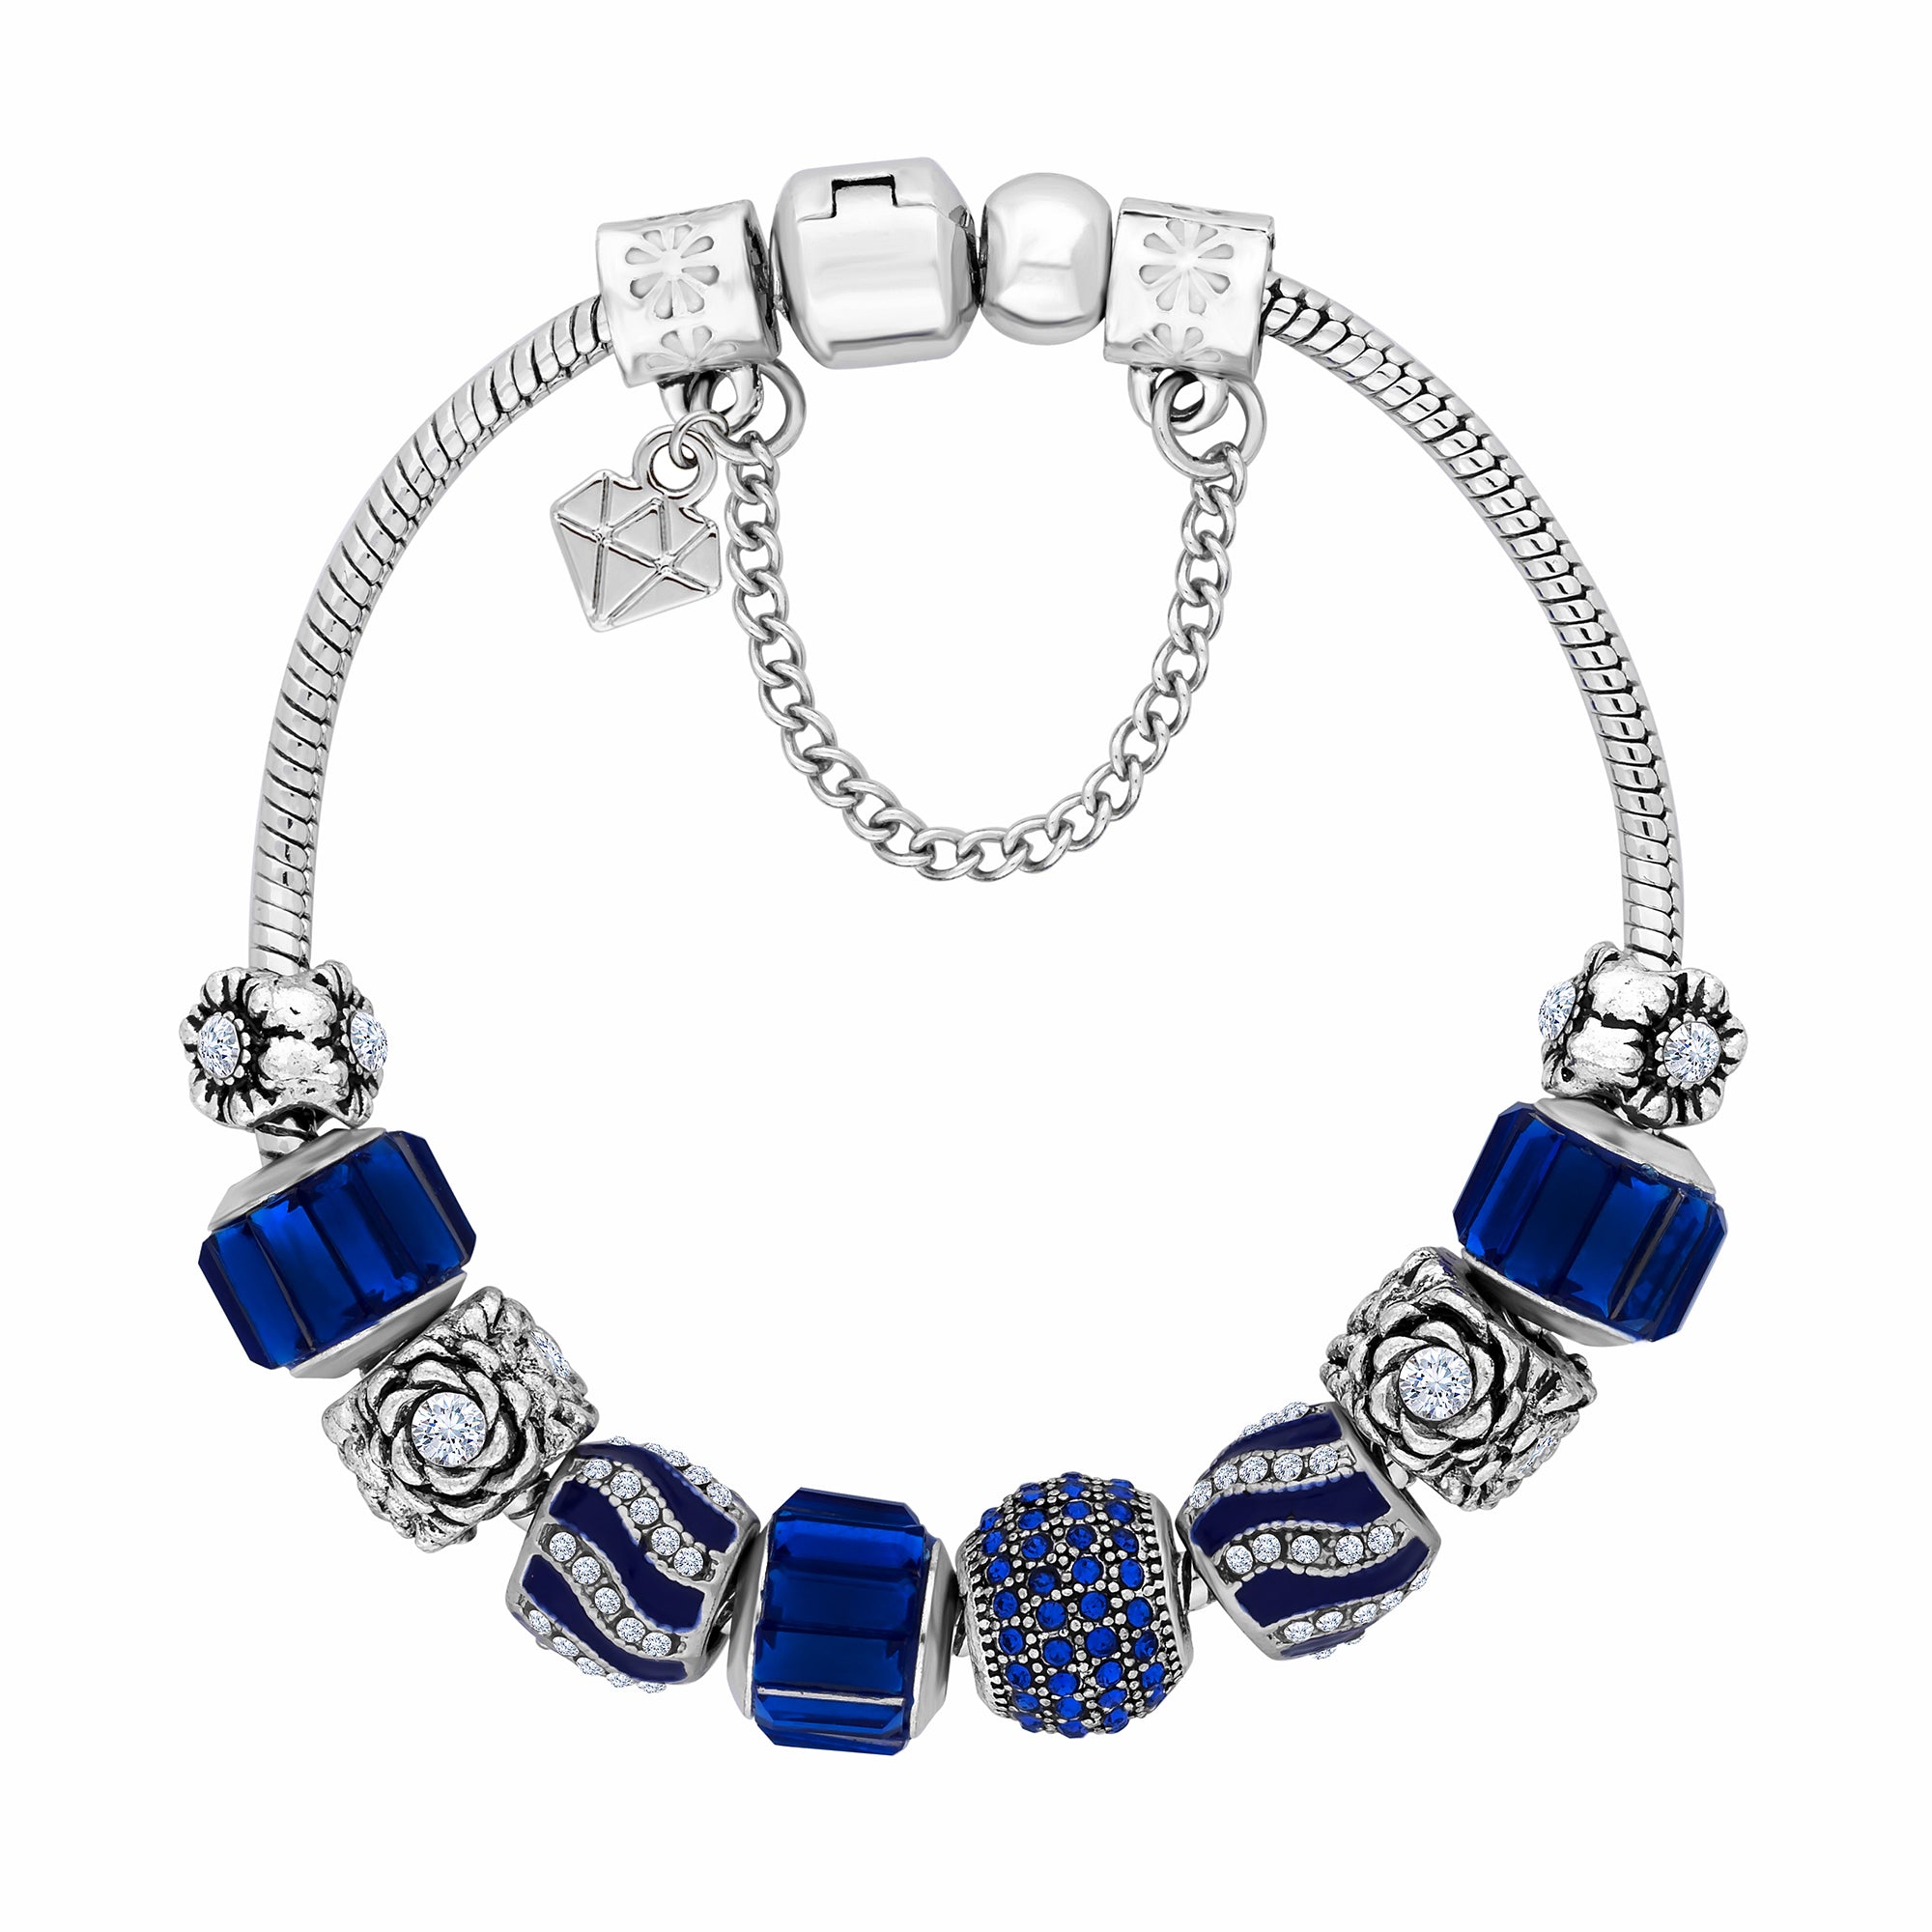 Charm Bracelet with Royal Blue Charms